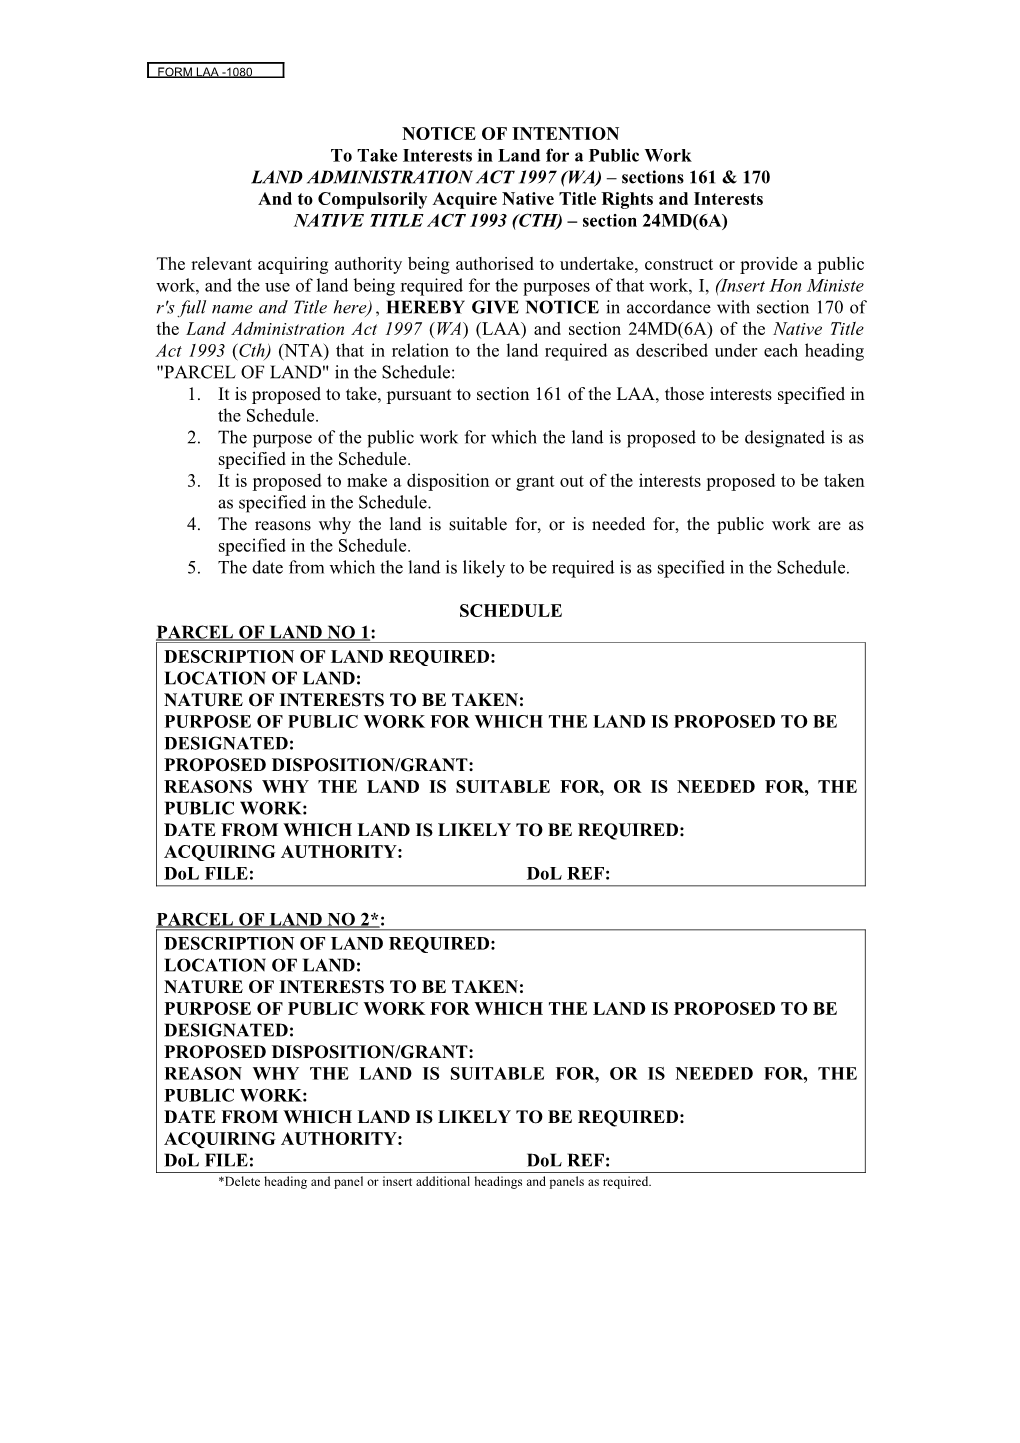 LAA Form 1080 Notice of Intention to Take Interests in Land for a Public Work (Sections